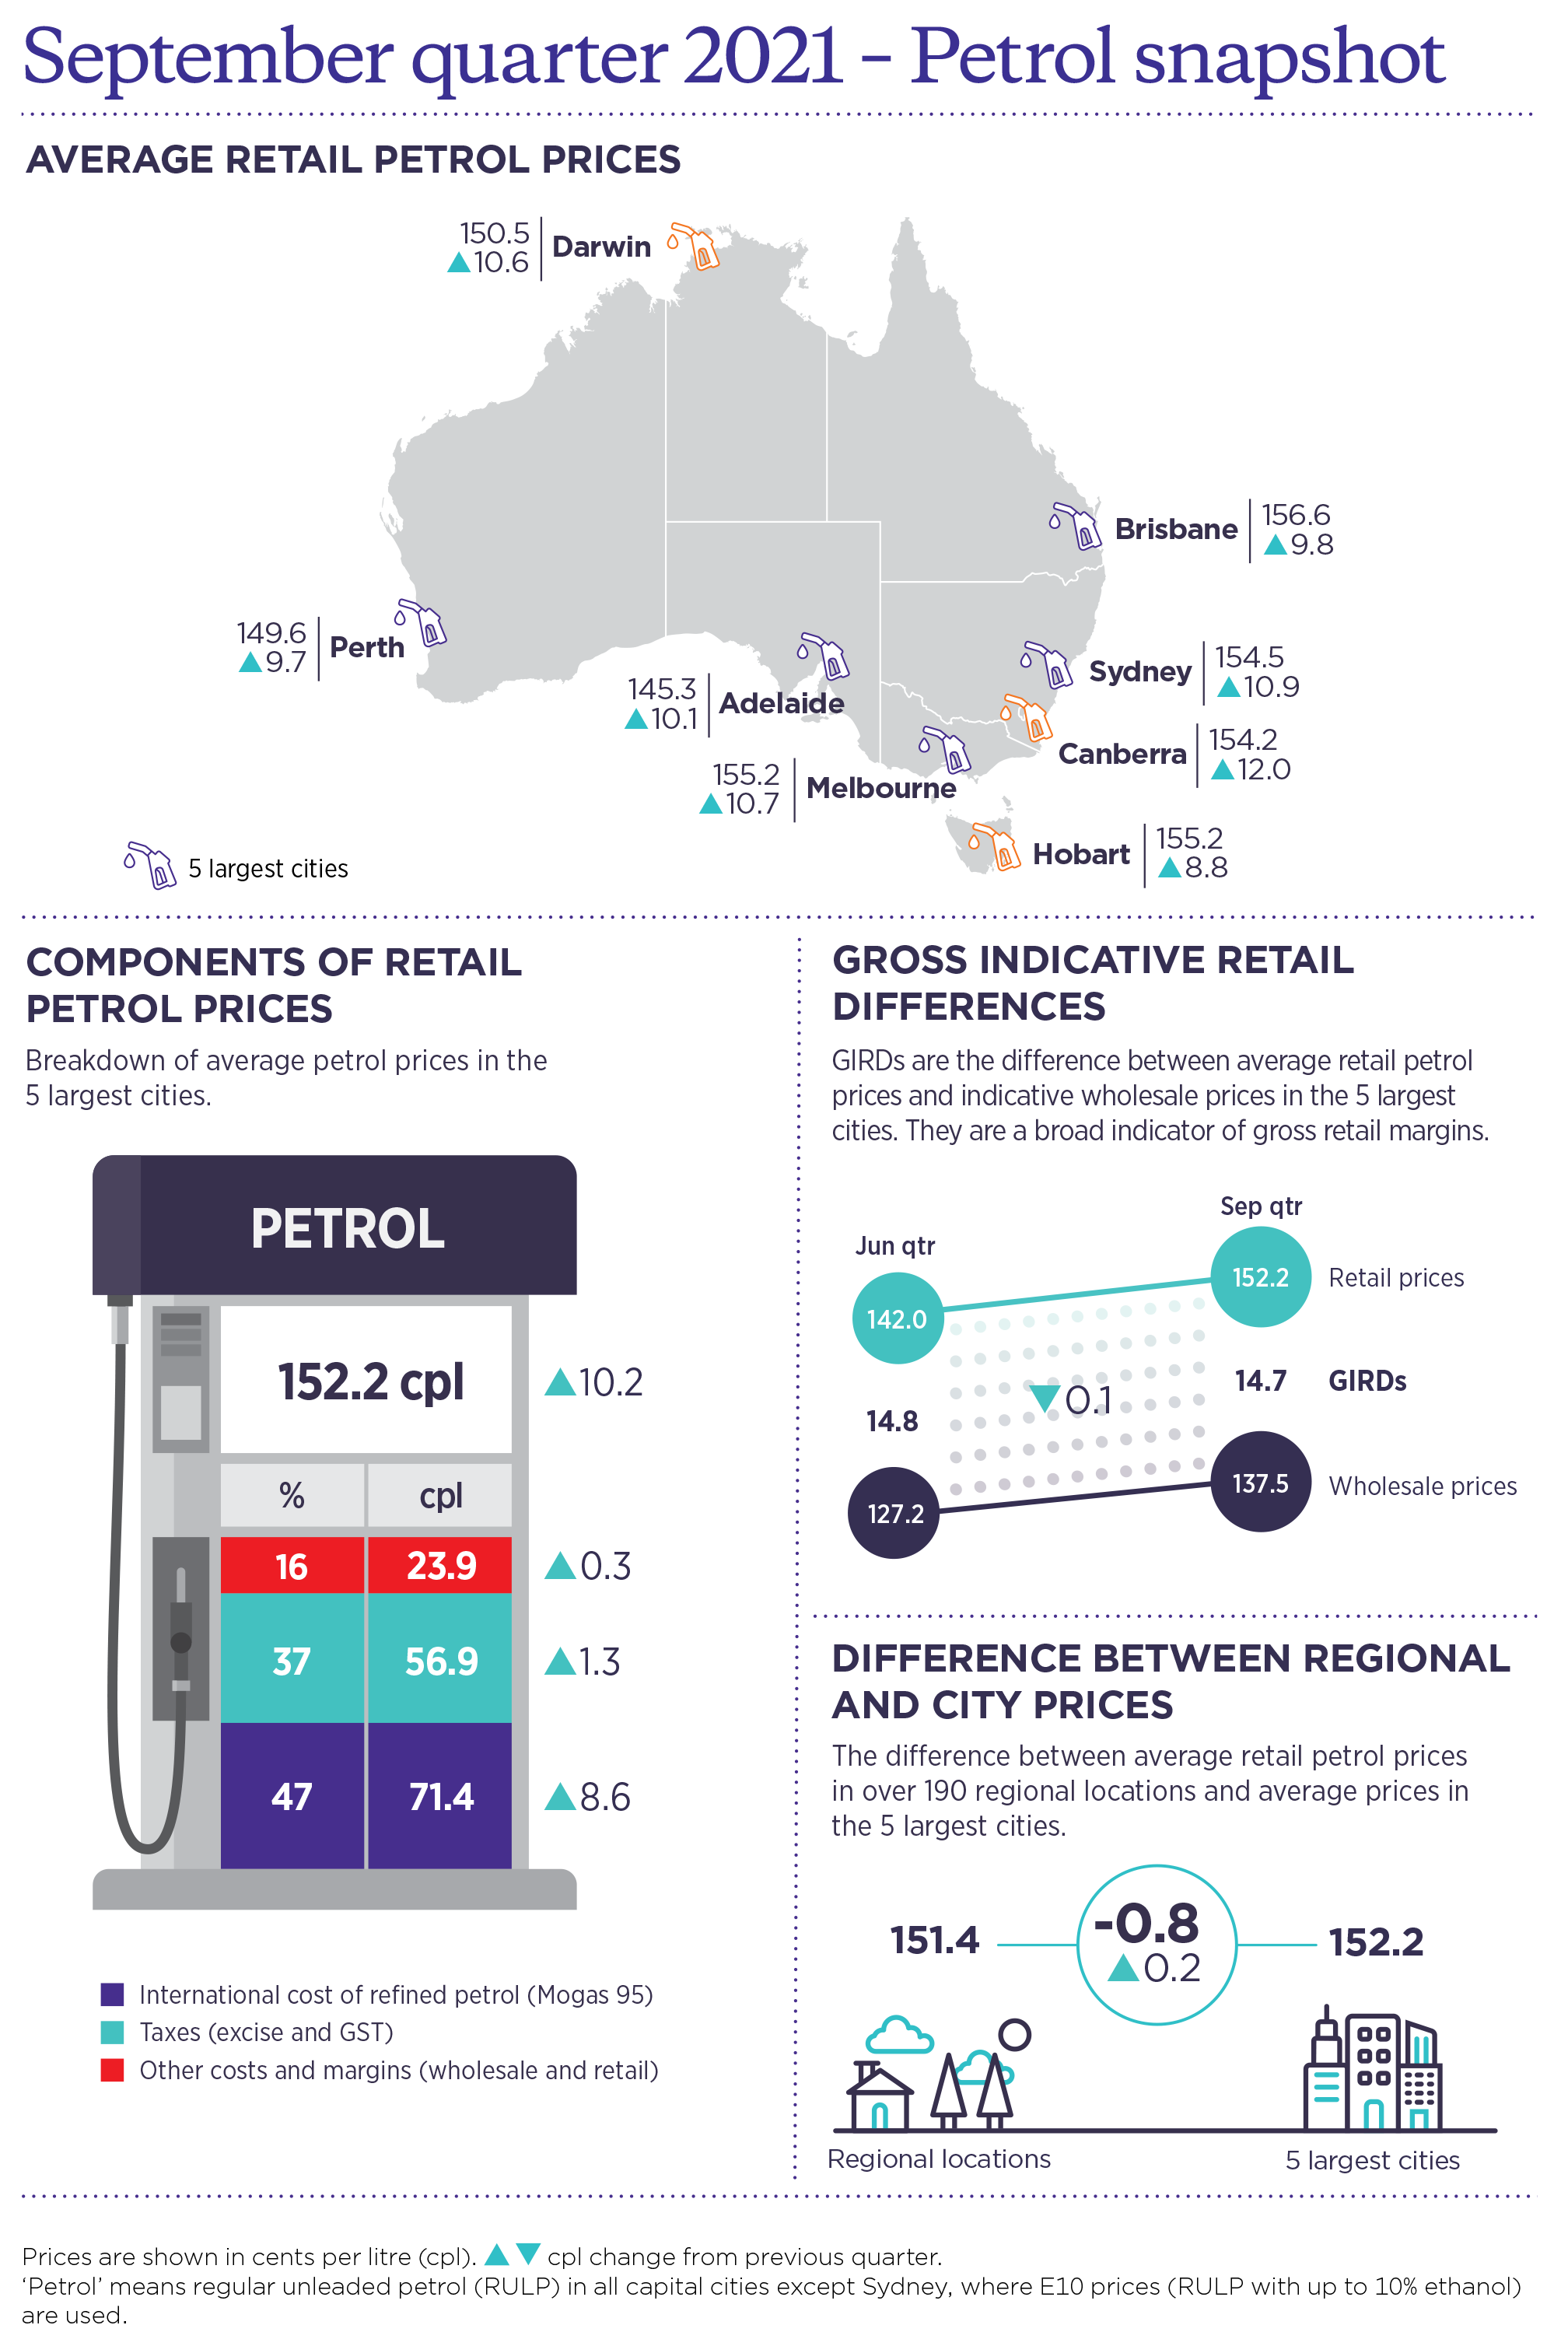 Infographic depicting annual average petrol prices in Australian capital cities, components of retail petrol prices, gross indicative retail differences, and difference between regional and city prices in 2020-21